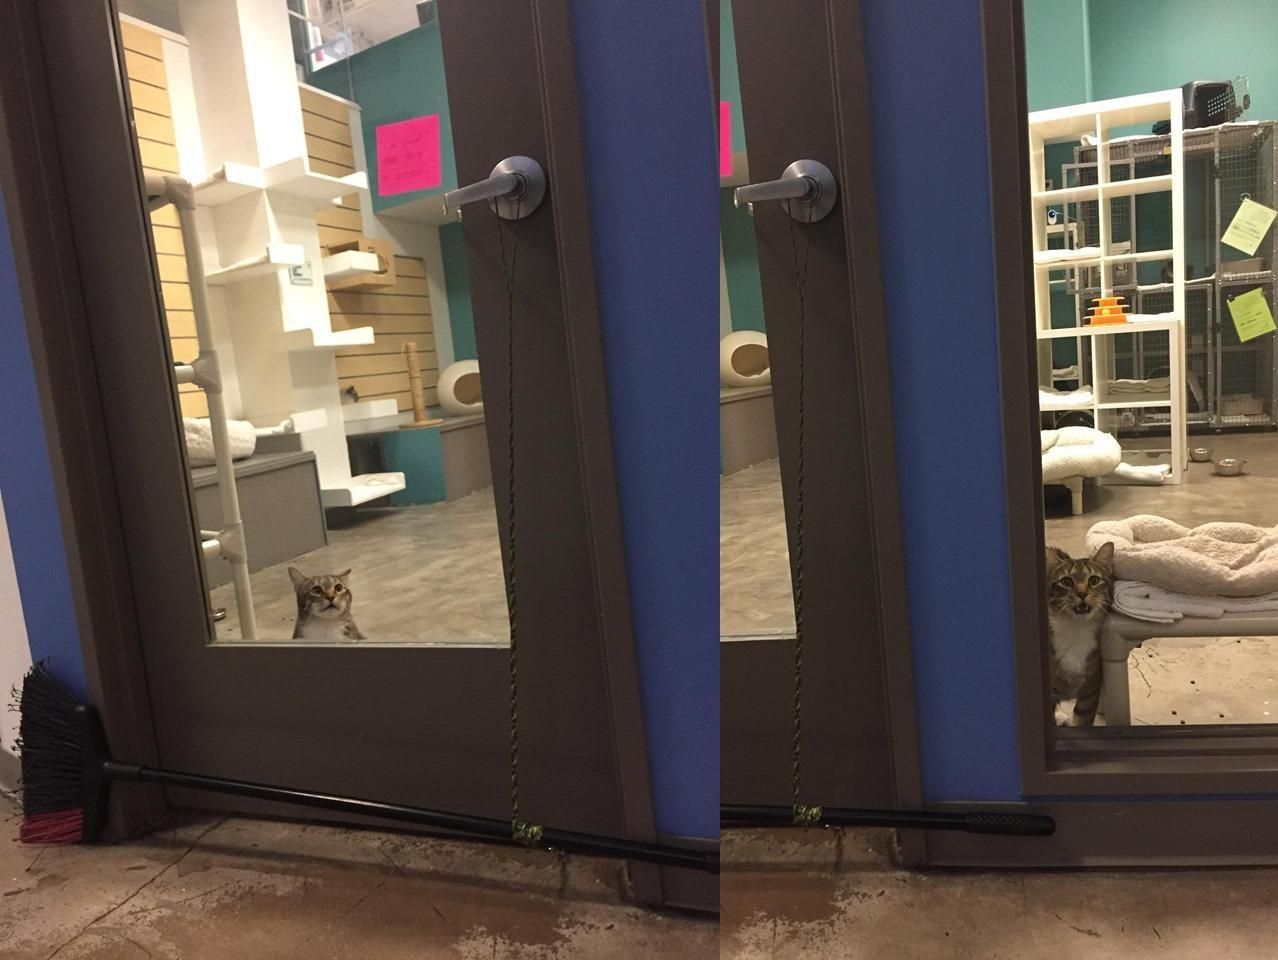 This shelter cat named Quilty kept opening the door to let all the cats out, so the staff rigged up a broom to keep the door closed. Quilty is not happy about this.